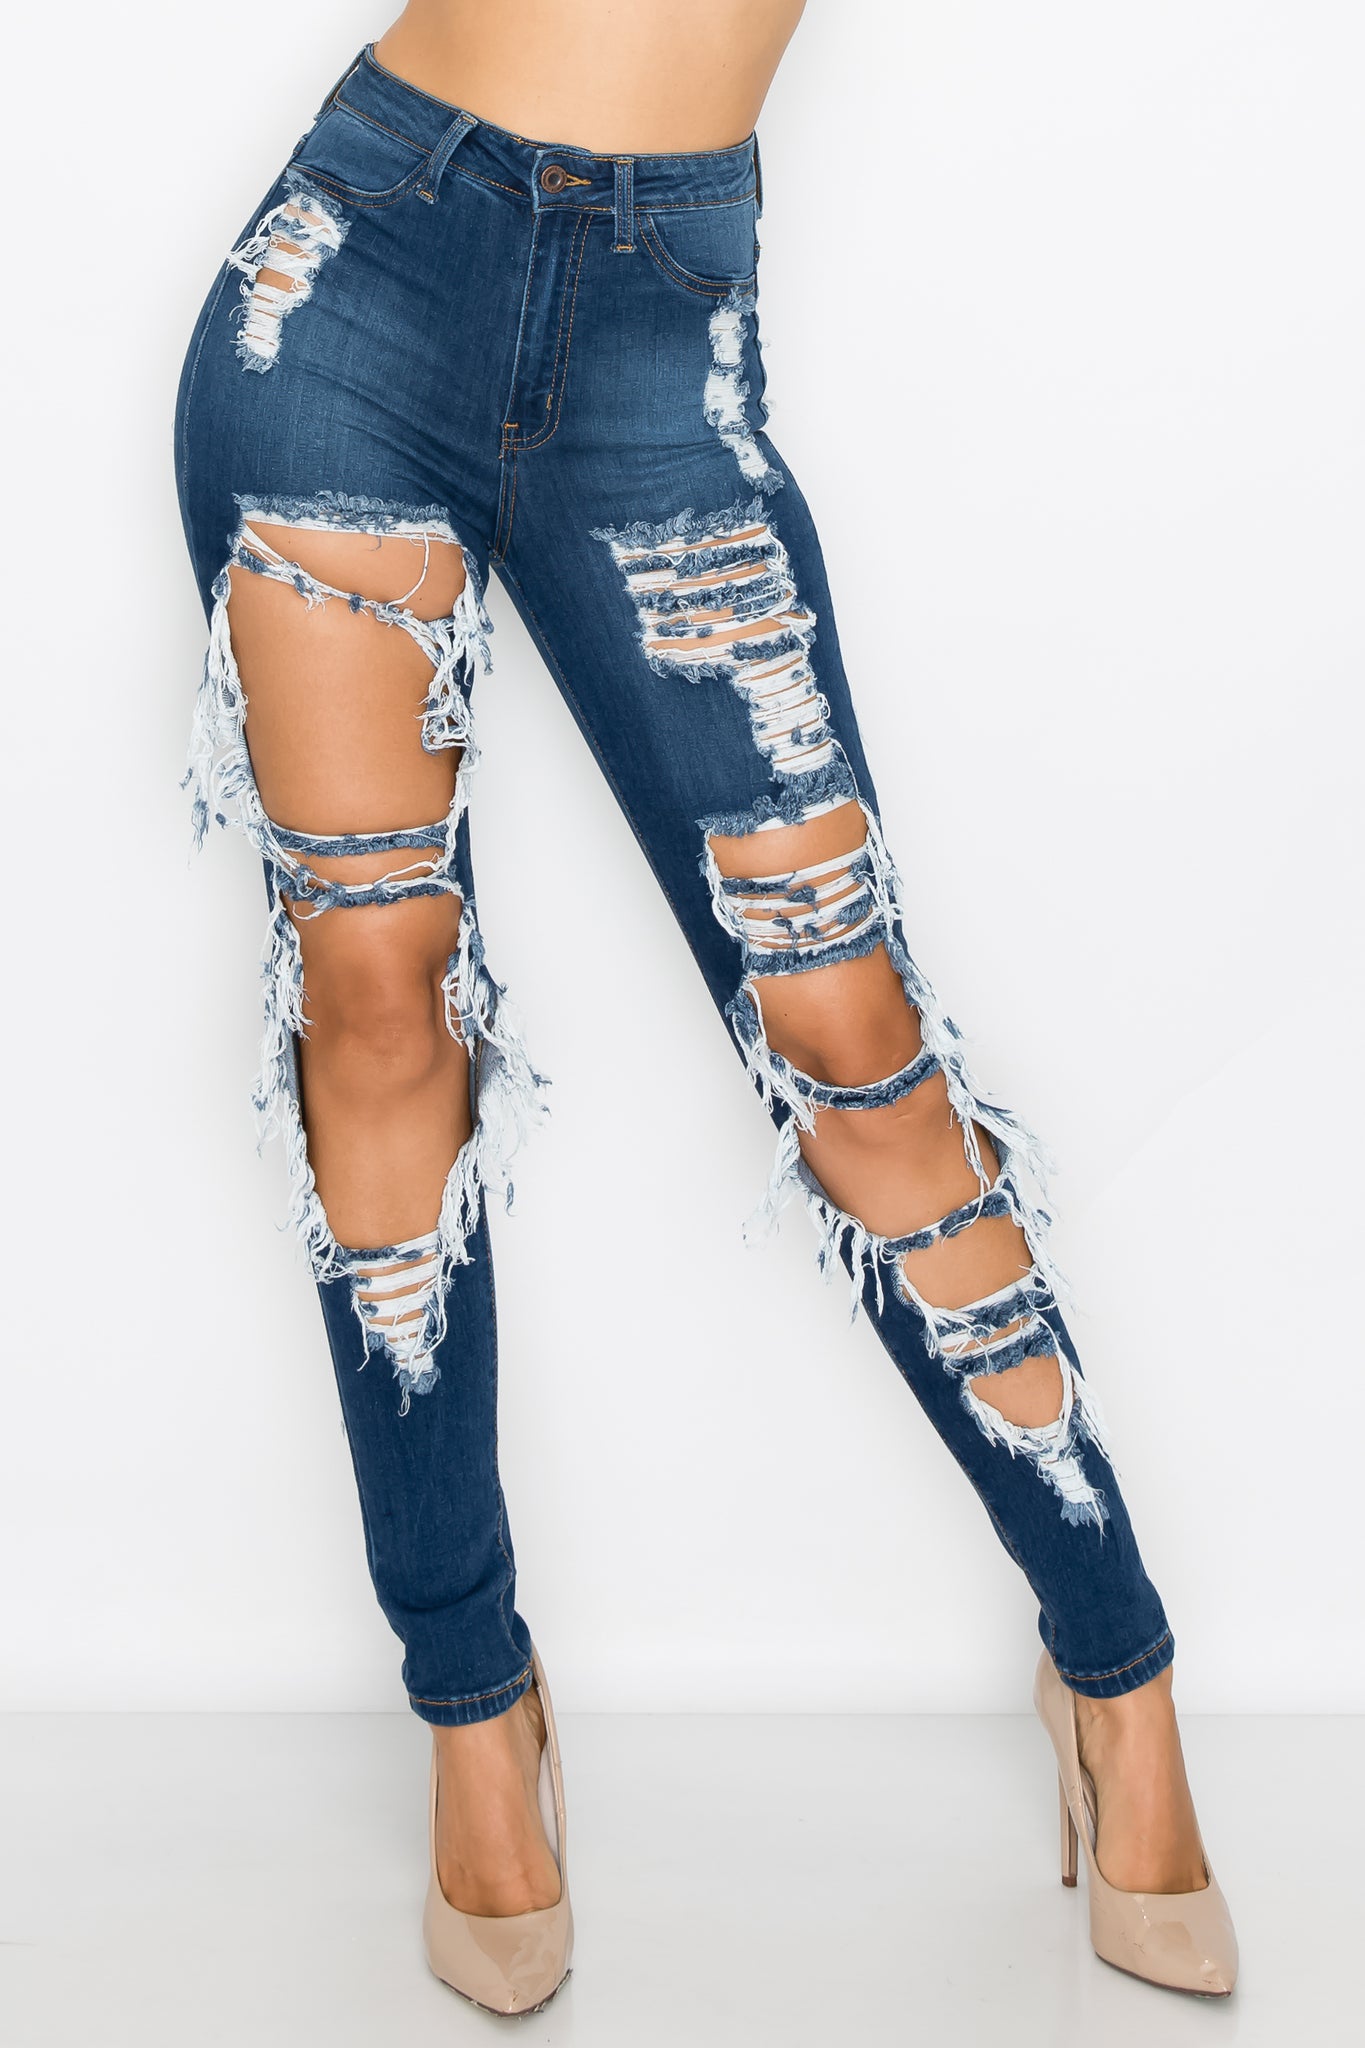 Women's Ripped Jeans